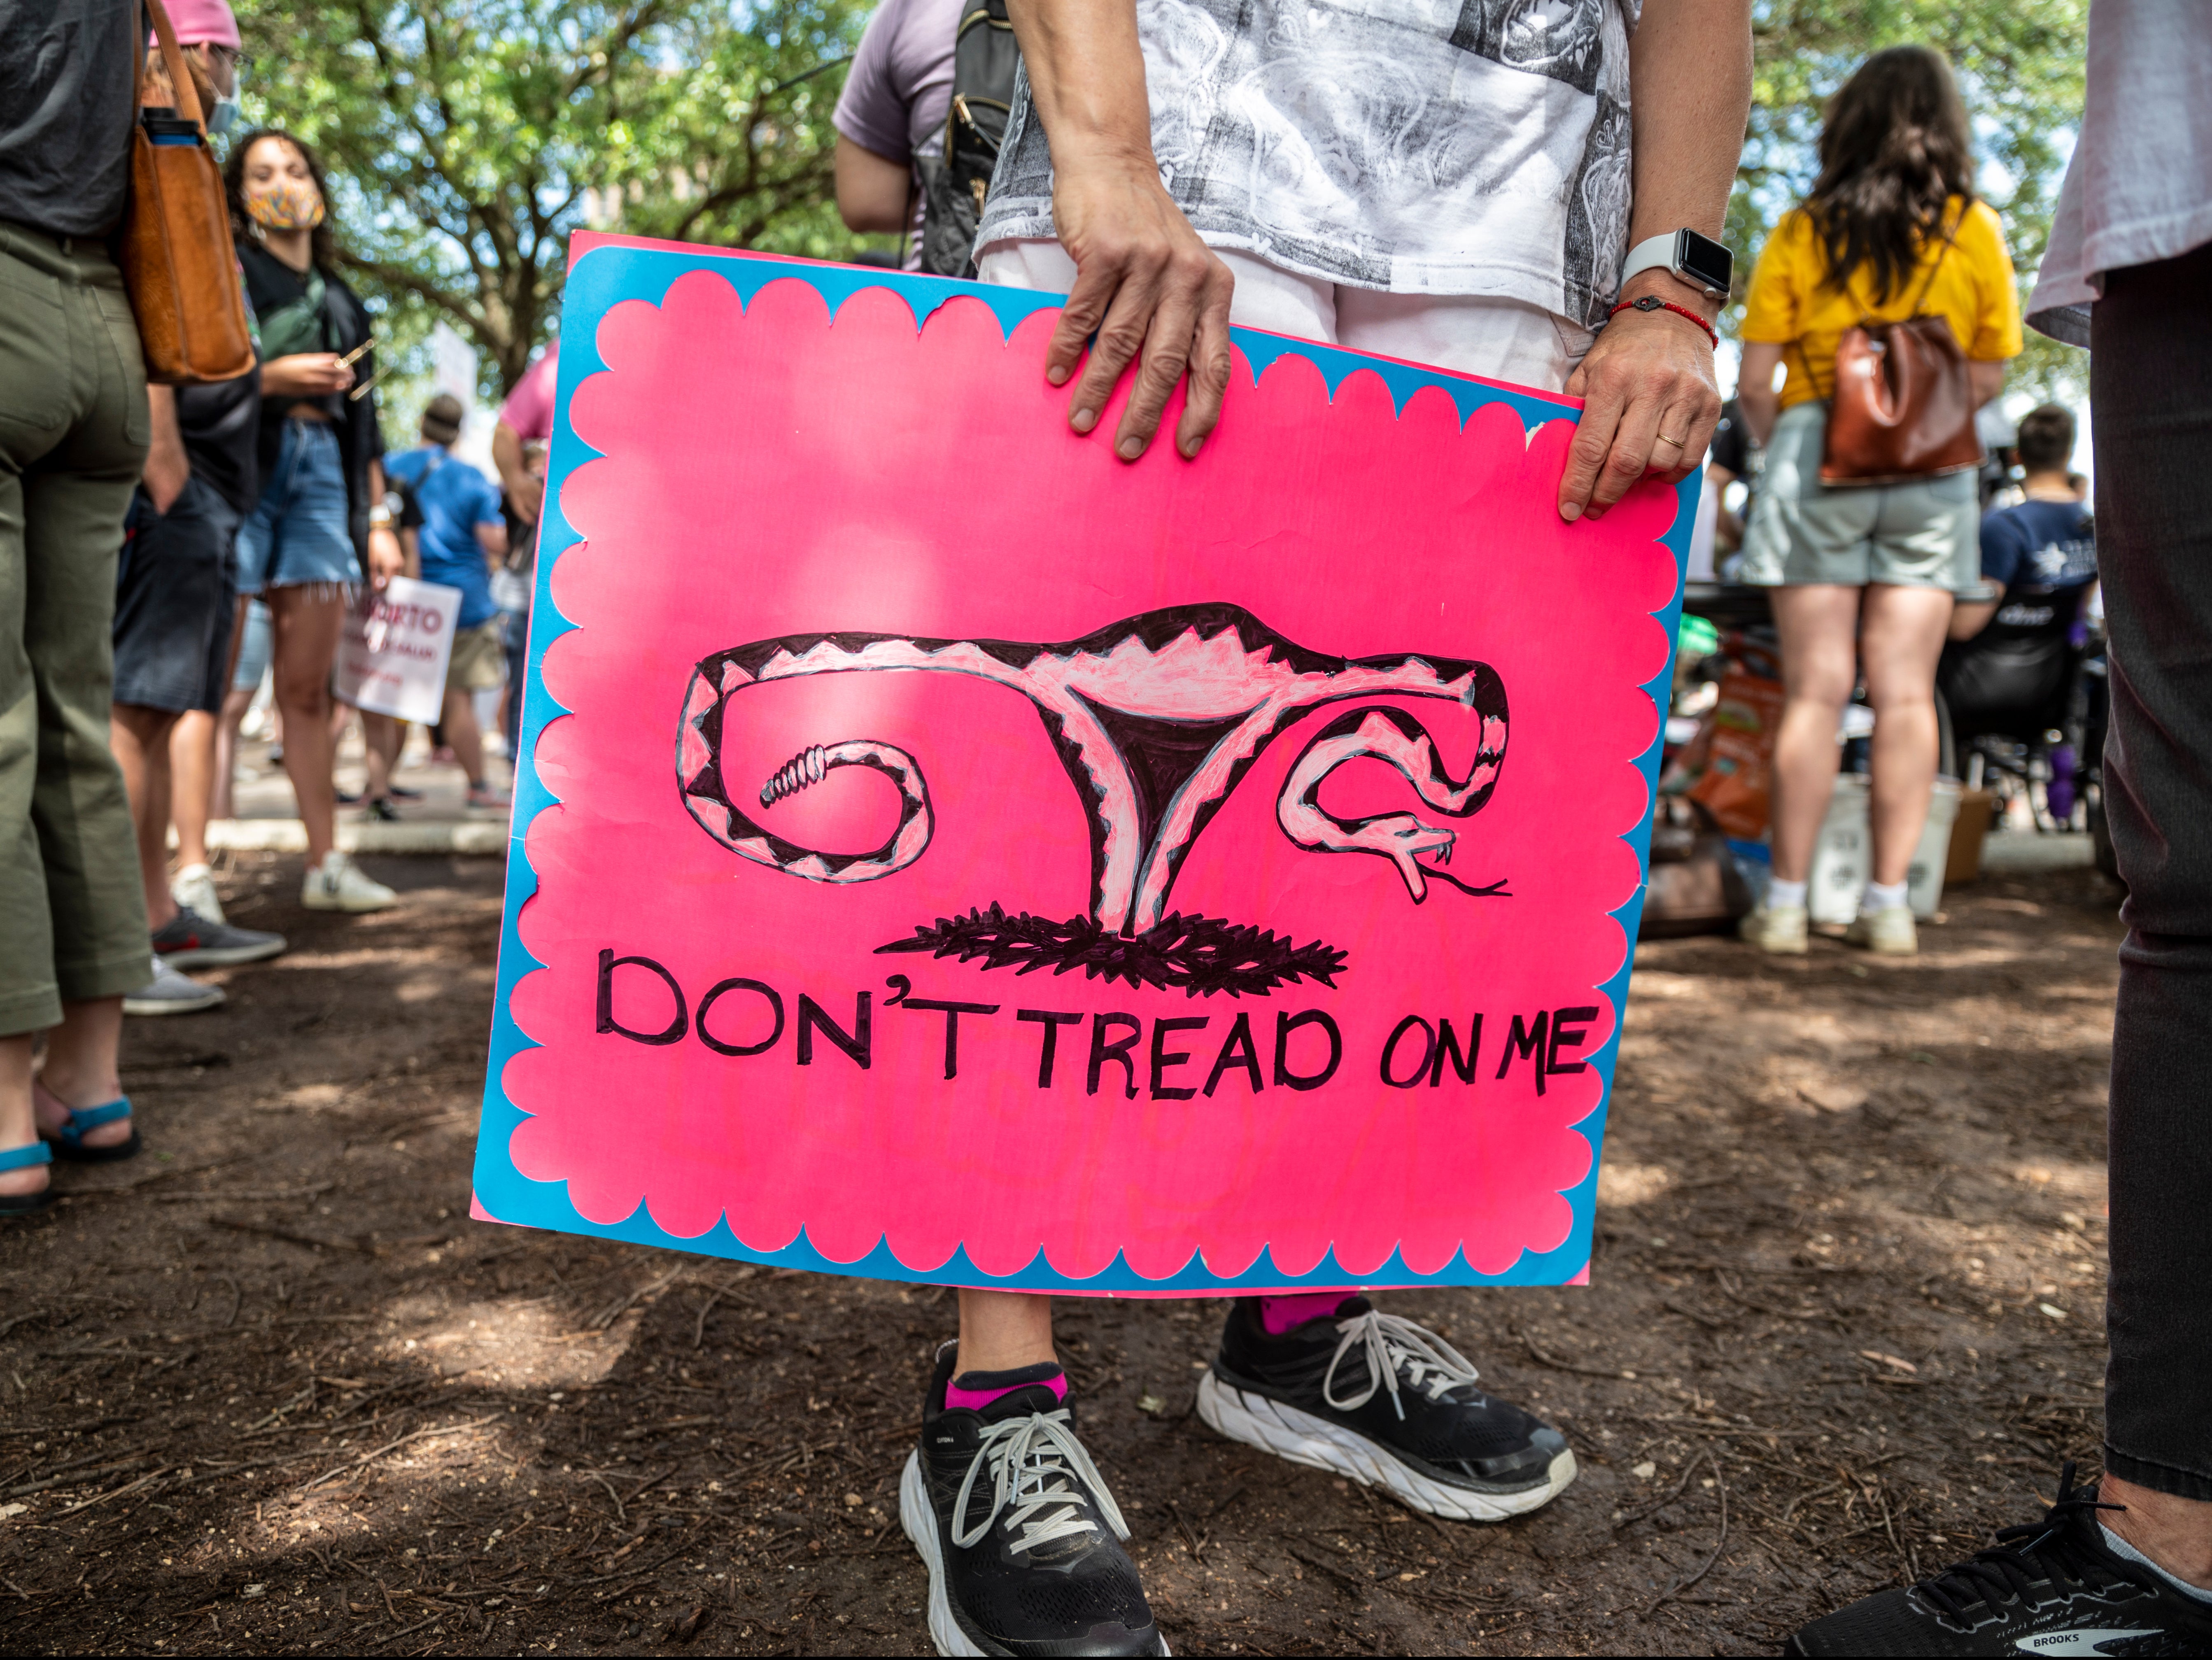 <p>A protester holds a sign before a protest outside the Texas state capitol on 29 May 2021 in Austin, Texas</p>